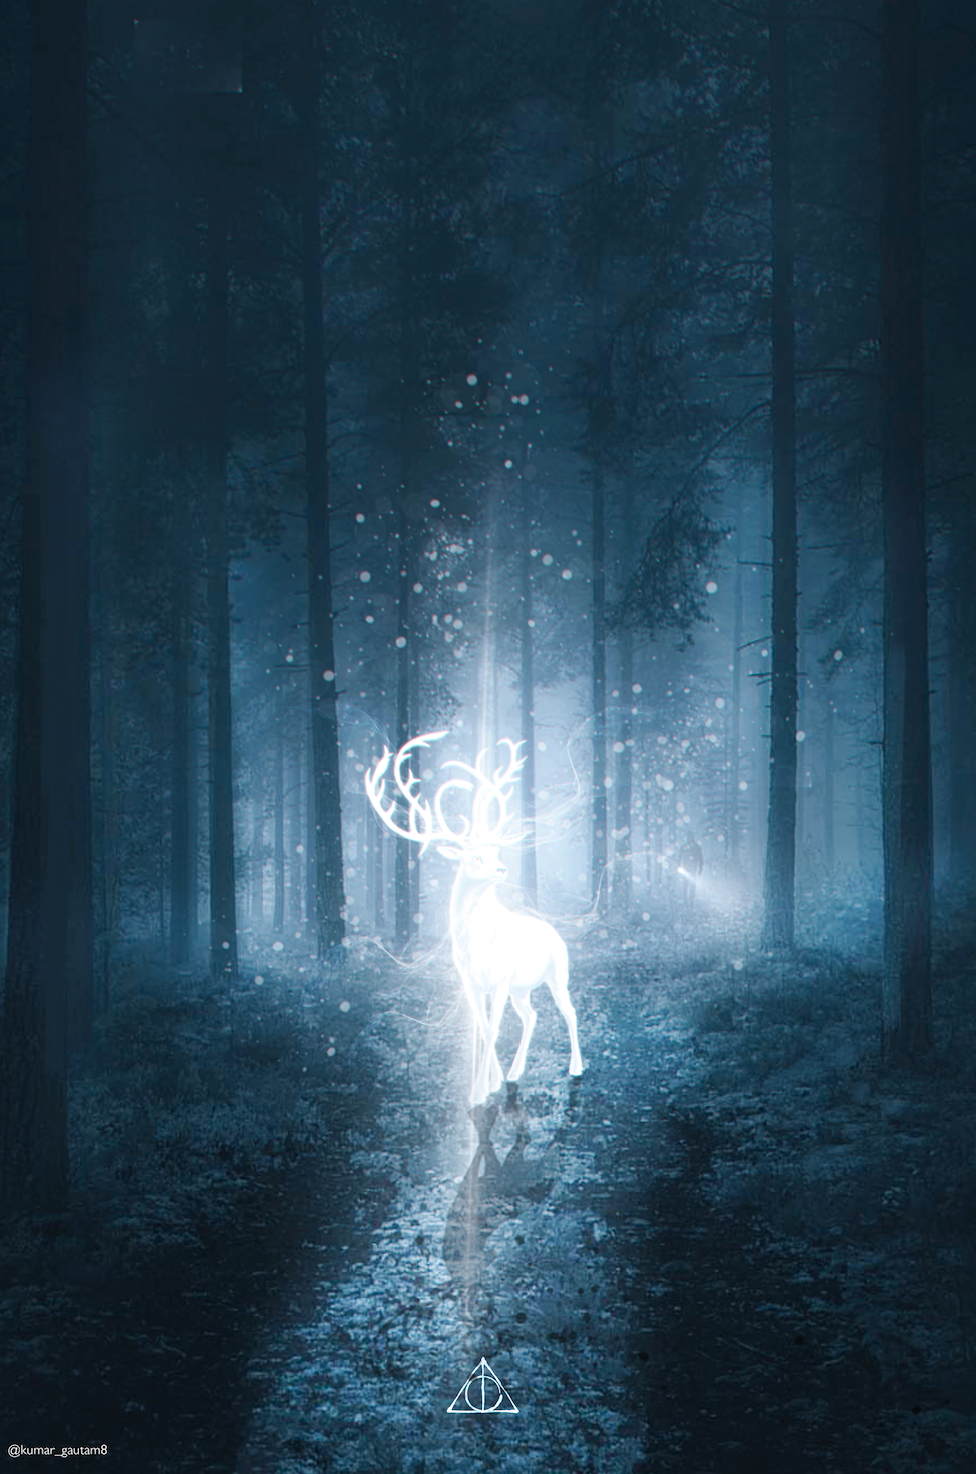 Harry Potter Patronus Poster Only Defining